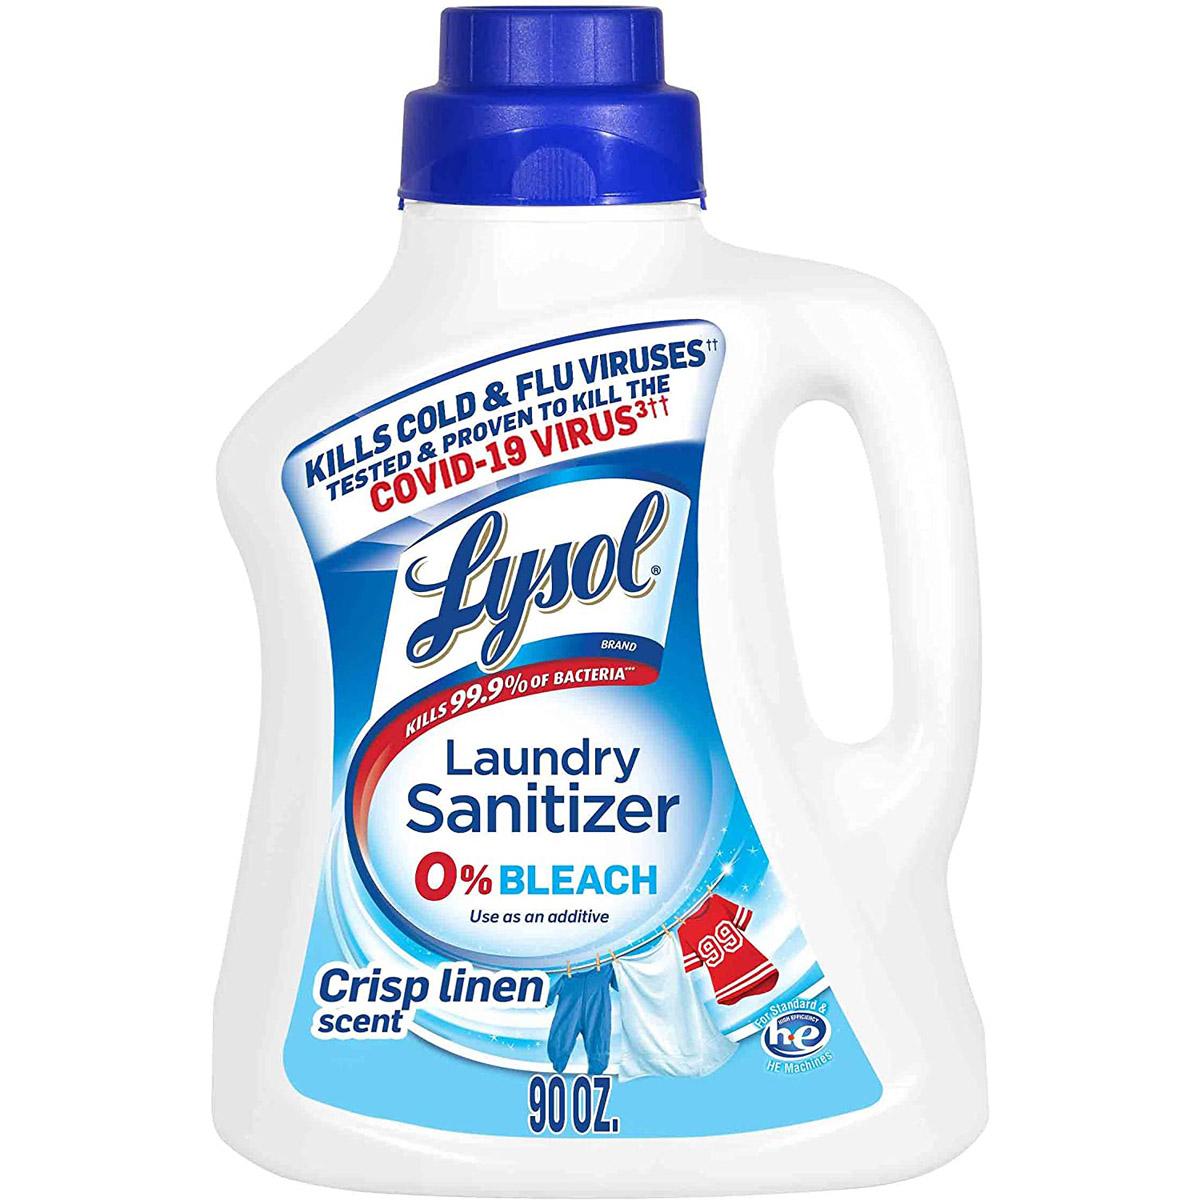 90oz Lysol Laundry Sanitizer Additive for $6.49 Shipped